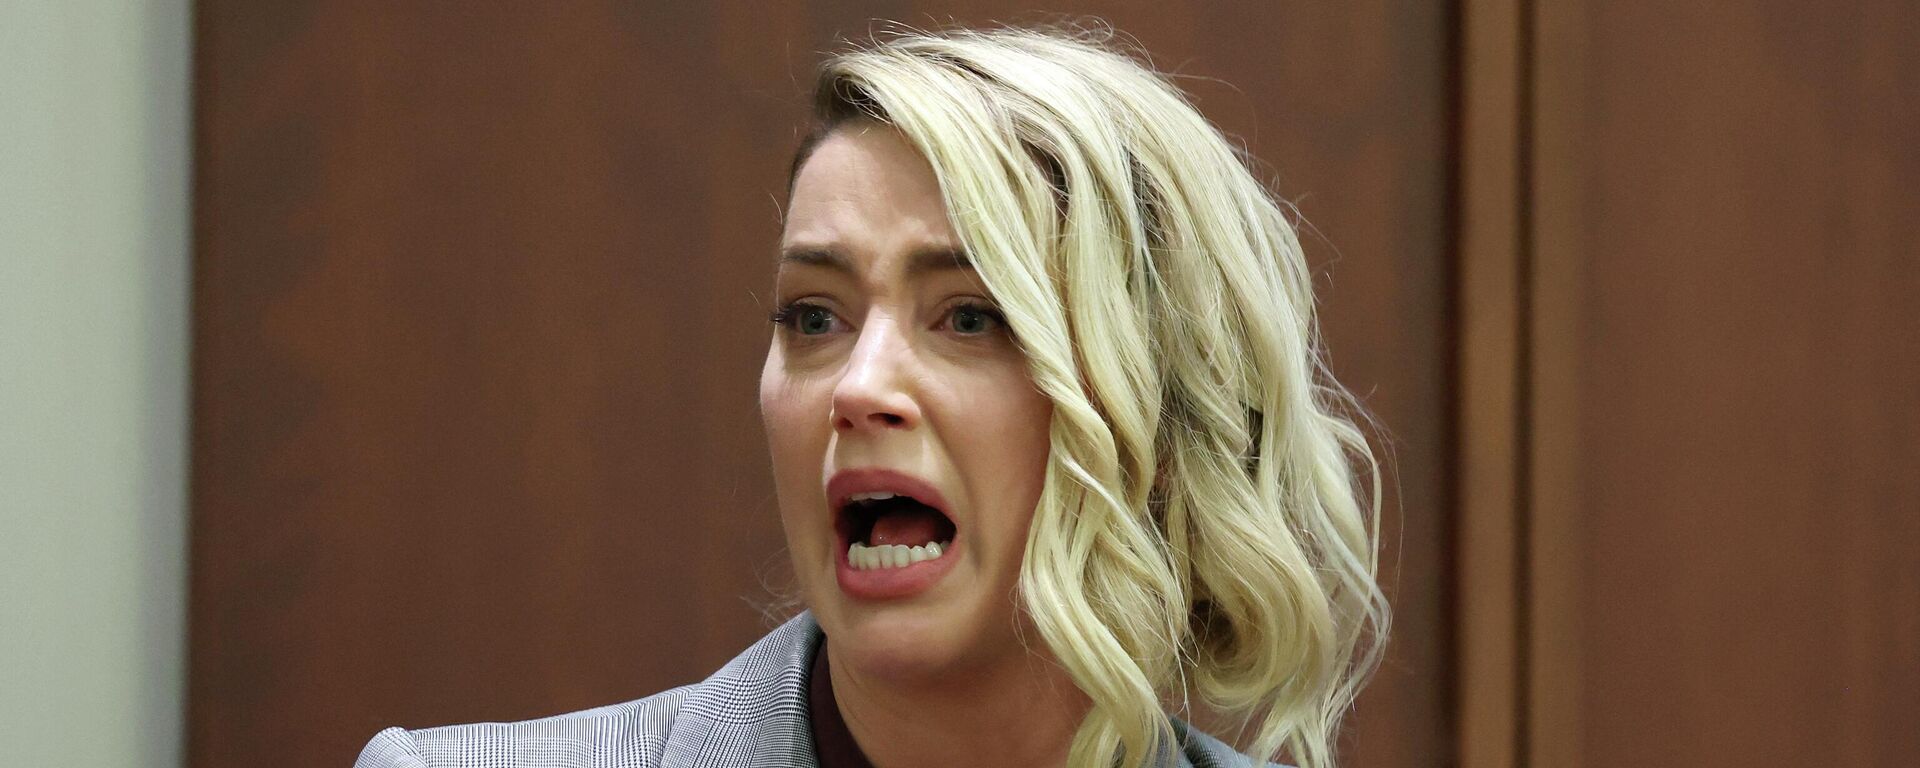 (FILES) In this file photo taken on May 26, 2022, US actor Amber Heard testifies during the Depp vs Heard defamation trial at the Fairfax County Circuit Court in Fairfax, Virginia. - Sputnik International, 1920, 17.06.2022